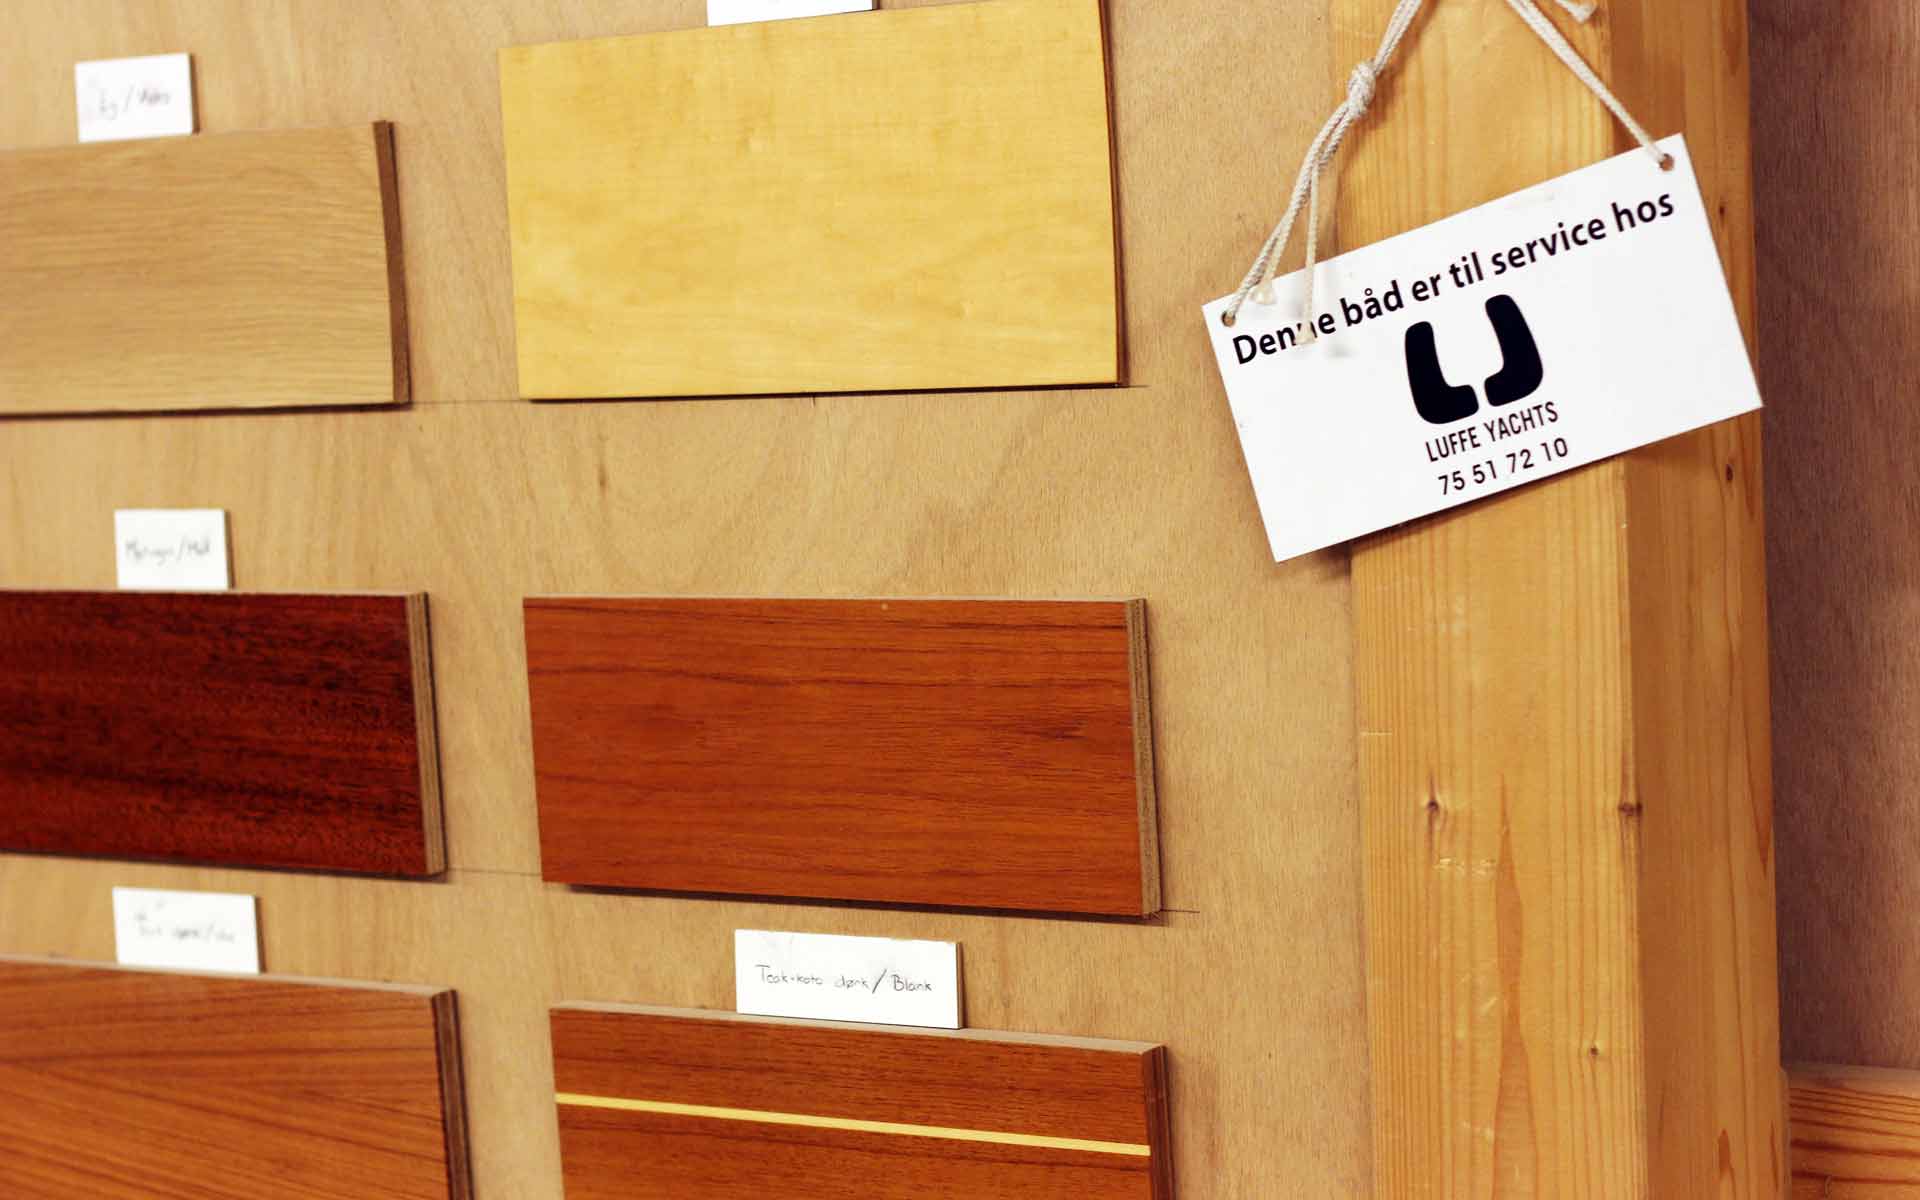 A Luffe owner can choose from a variety of high grade wooden material